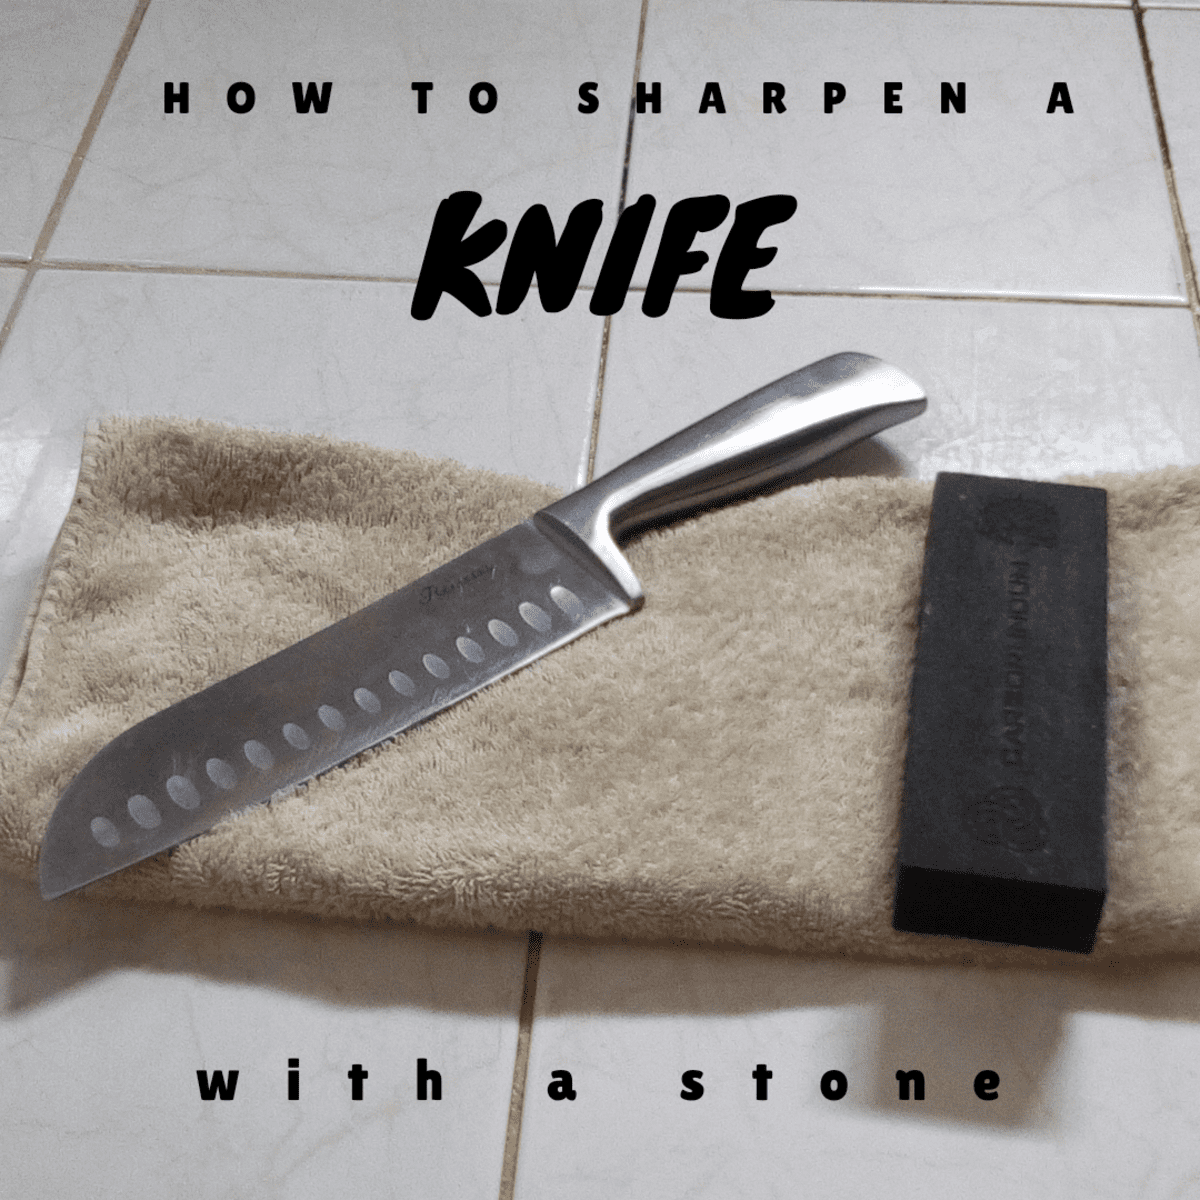 https://images.saymedia-content.com/.image/ar_1:1%2Cc_fill%2Ccs_srgb%2Cq_auto:eco%2Cw_1200/MTc0NDI1NjMxMjc3NDU4Nzky/how-to-sharpen-a-knife-with-a-stone.png